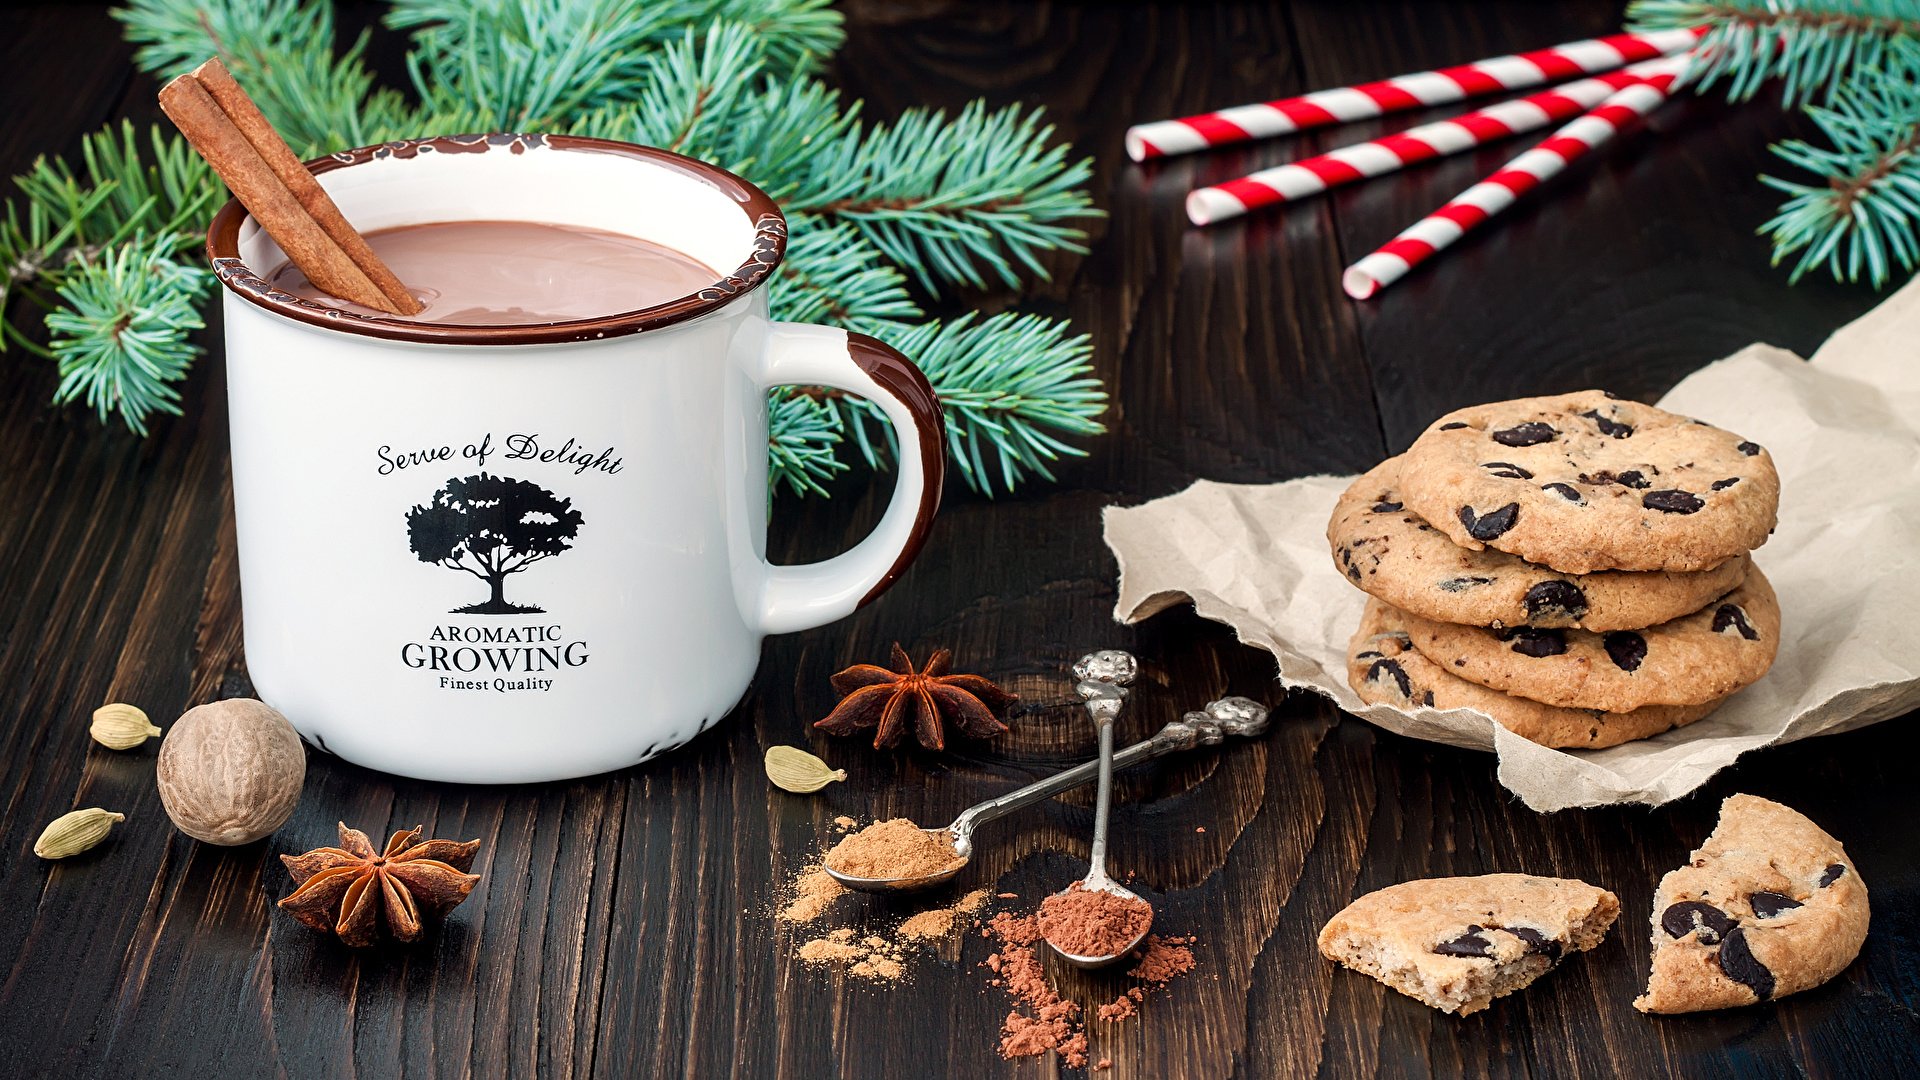 1920x1080 Christmas Hot Chocolate and Chocolate Chip Cookies Wallpaper Back...